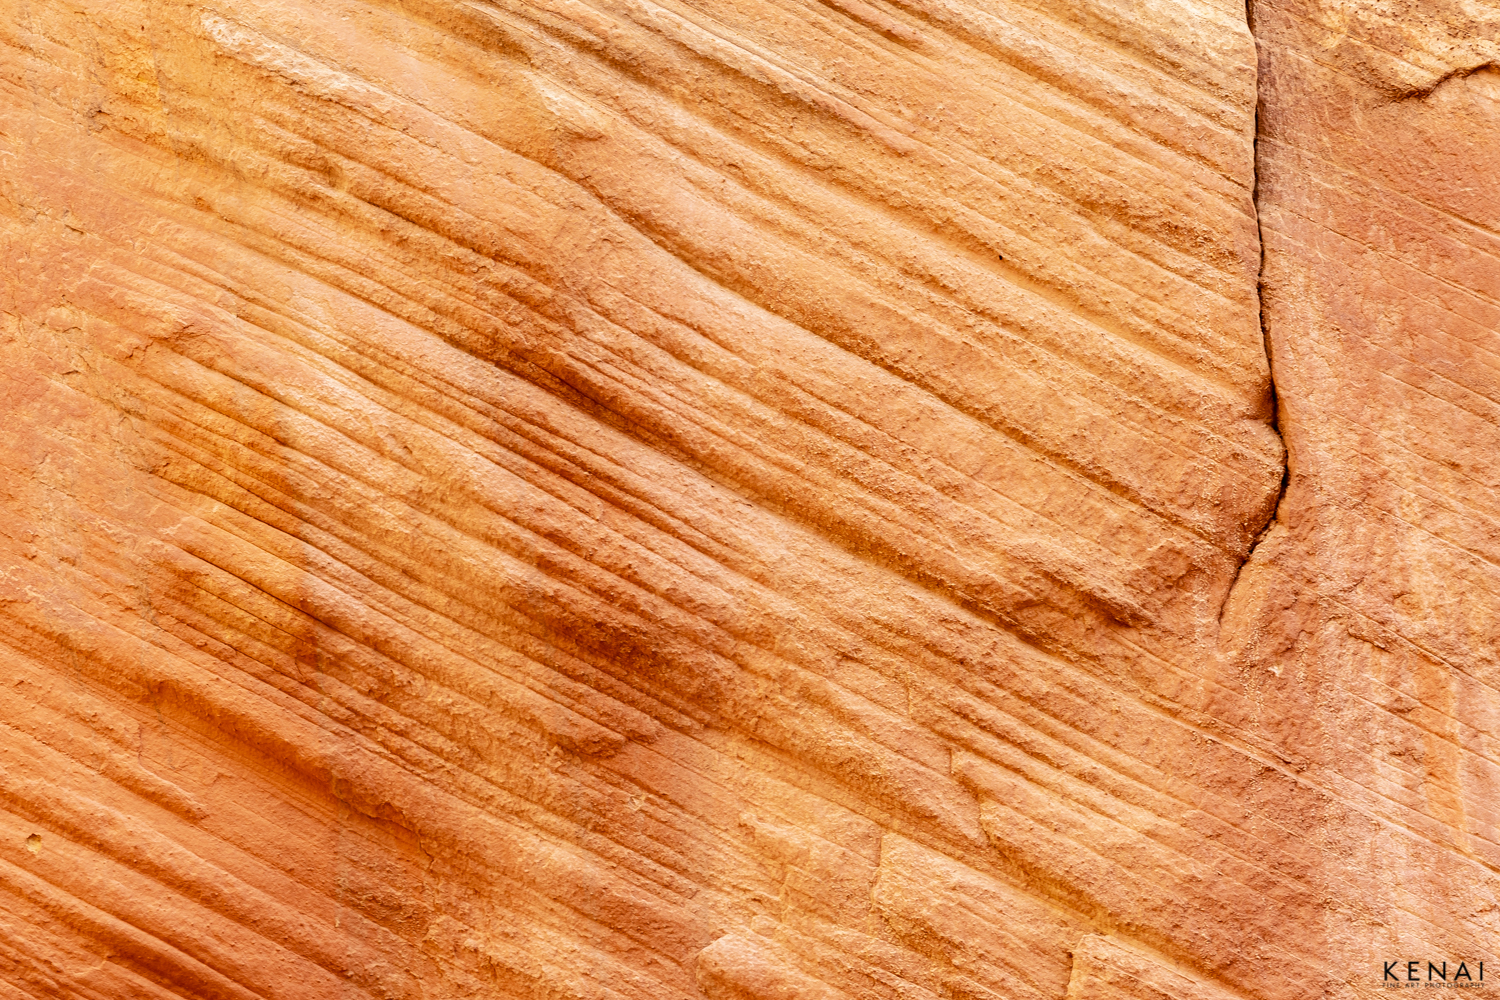 Sandstone layers formed under high pressure and millions of years in Capital Reef National Park, Utah. 